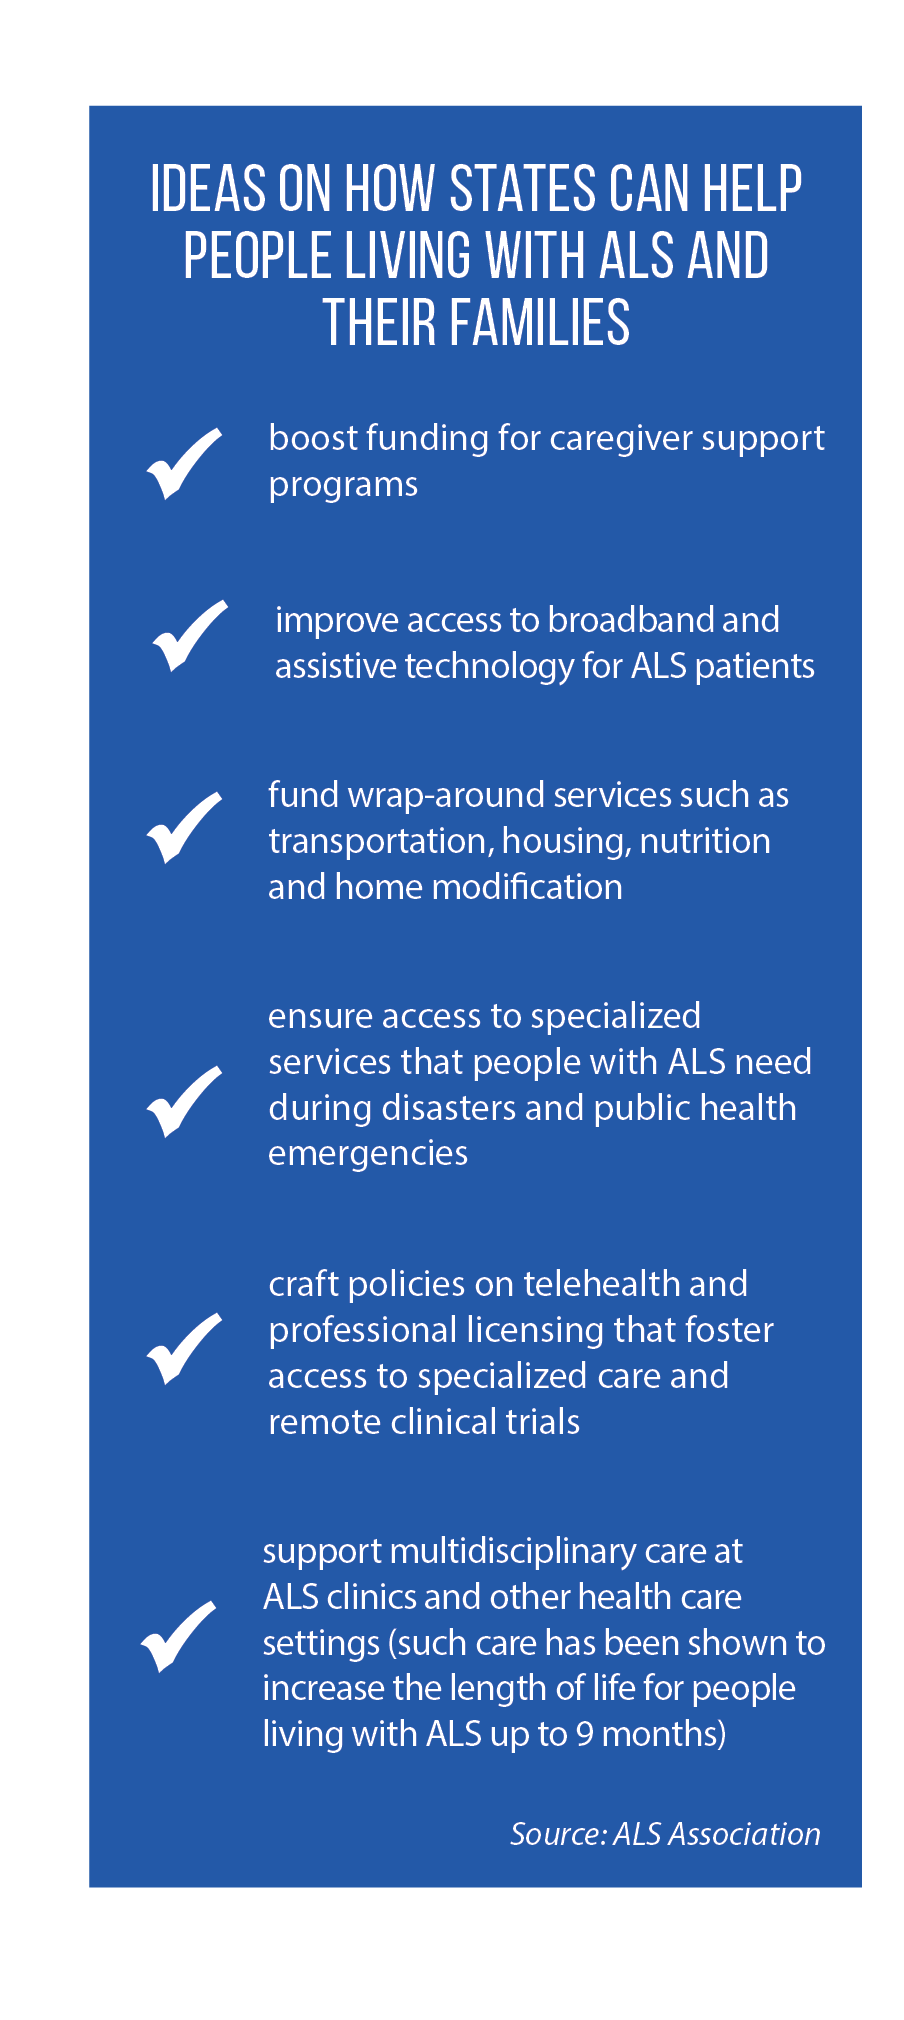 ALS Association's policy recommendations for states